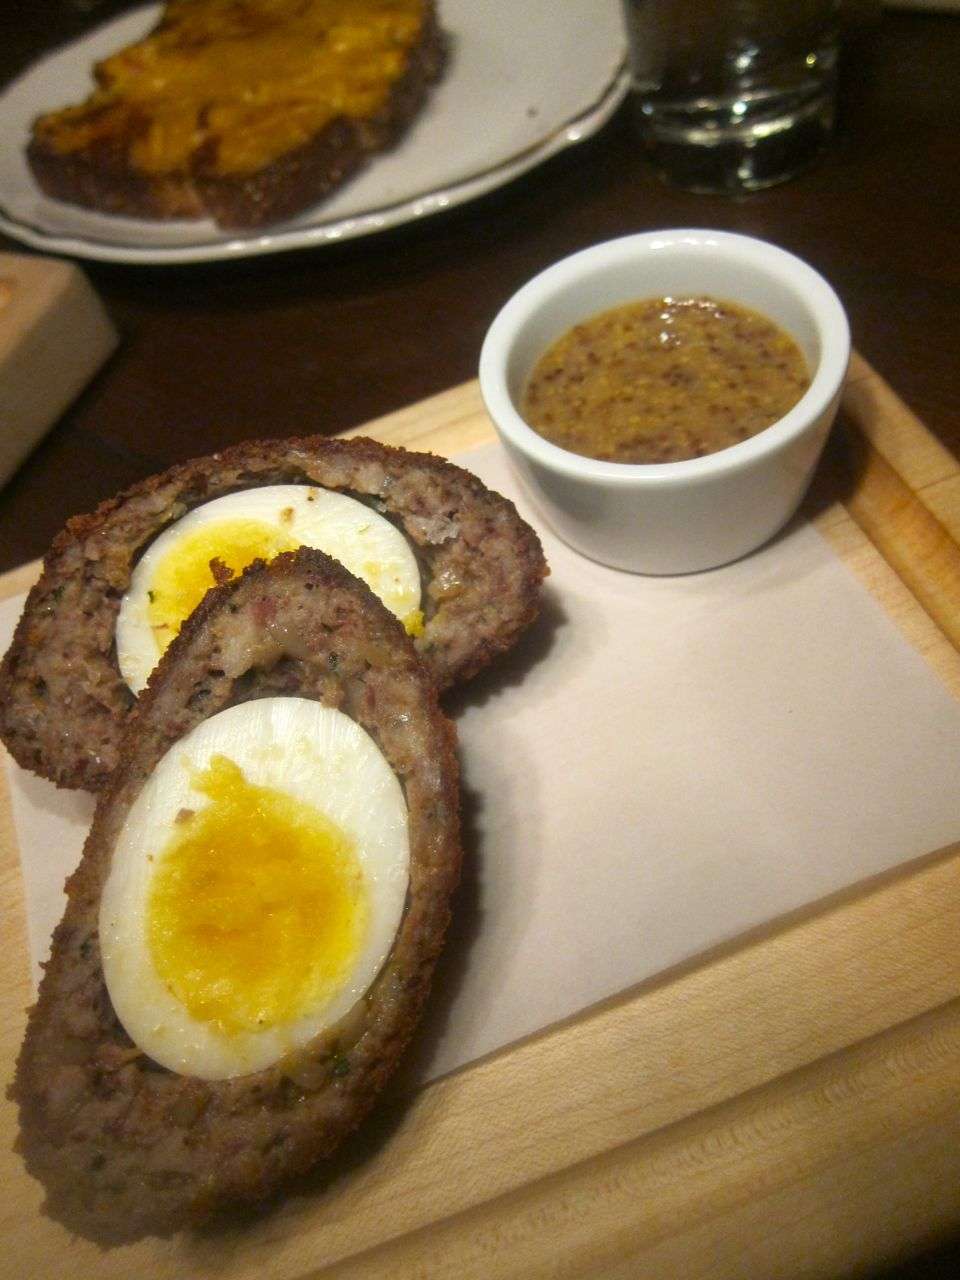 I’m not sure I’m really a fan of the Scotch egg, although this one is exceptional.